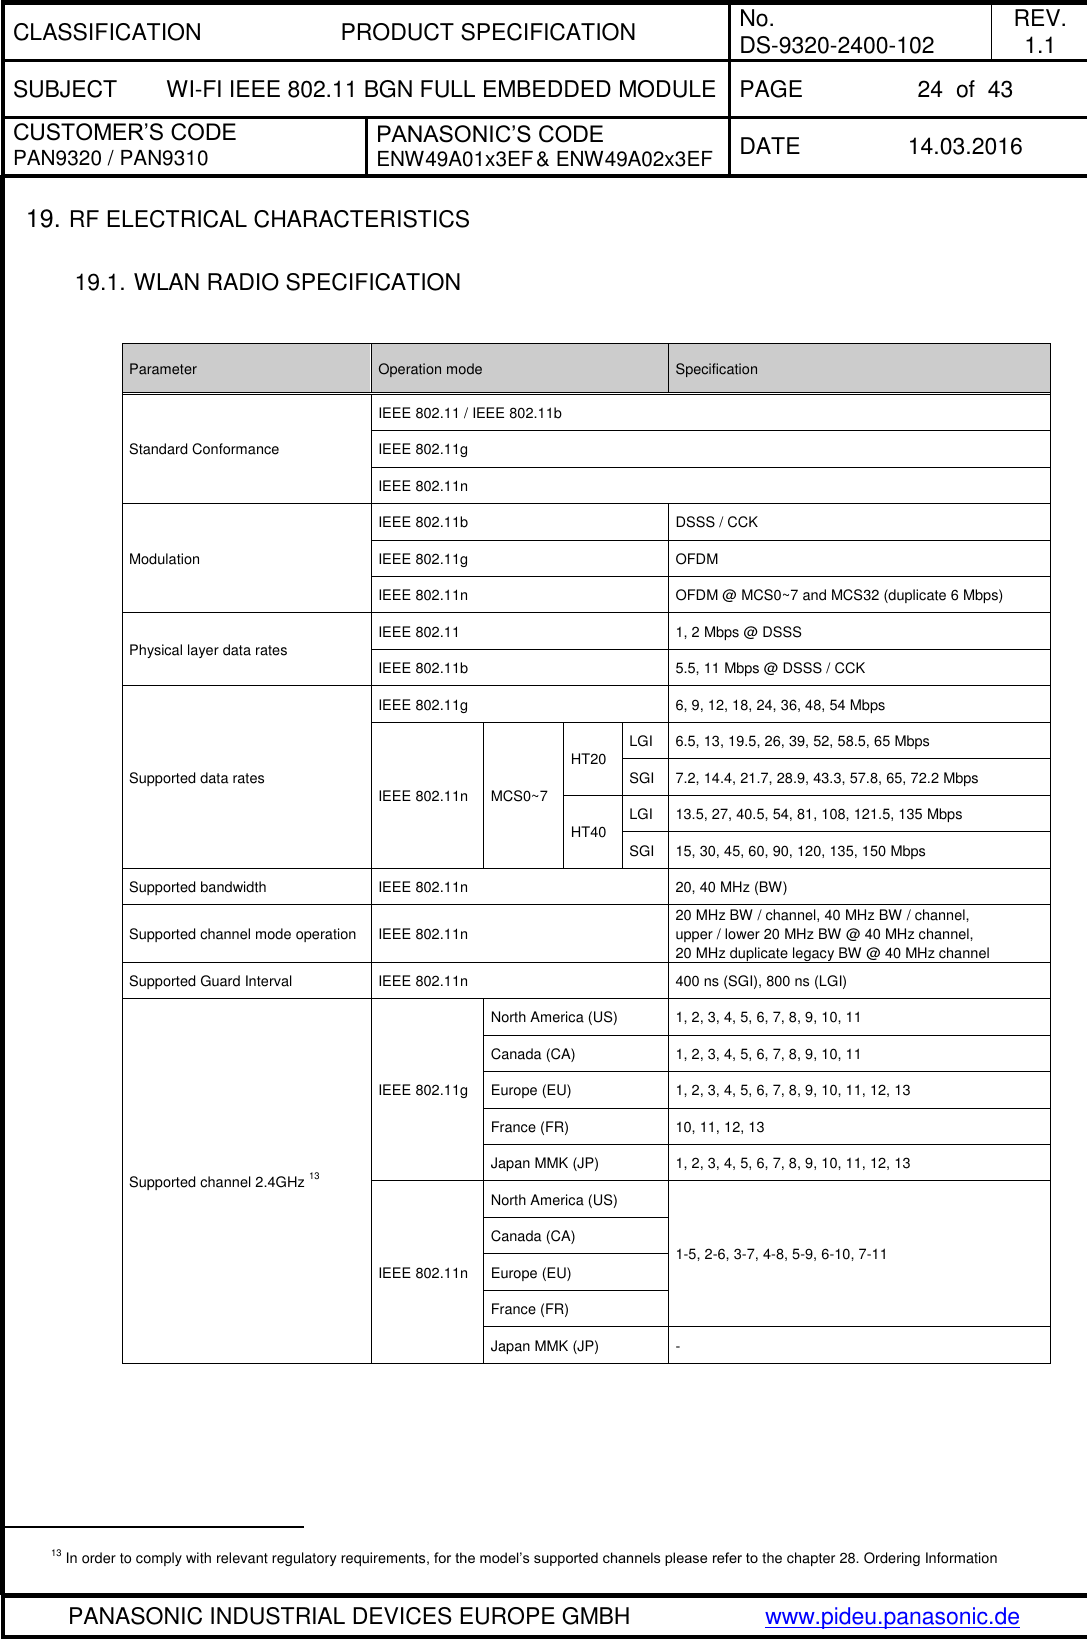 CLASSIFICATION PRODUCT SPECIFICATION No. DS-9320-2400-102 REV. 1.1 SUBJECT WI-FI IEEE 802.11 BGN FULL EMBEDDED MODULE PAGE 24  of  43 CUSTOMER’S CODE PAN9320 / PAN9310 PANASONIC’S CODE ENW49A01x3EF &amp; ENW49A02x3EF DATE 14.03.2016   PANASONIC INDUSTRIAL DEVICES EUROPE GMBH www.pideu.panasonic.de  19. RF ELECTRICAL CHARACTERISTICS  19.1. WLAN RADIO SPECIFICATION   Parameter Operation mode Specification Standard Conformance IEEE 802.11 / IEEE 802.11b IEEE 802.11g IEEE 802.11n Modulation IEEE 802.11b DSSS / CCK IEEE 802.11g OFDM IEEE 802.11n OFDM @ MCS0~7 and MCS32 (duplicate 6 Mbps) Physical layer data rates IEEE 802.11 1, 2 Mbps @ DSSS IEEE 802.11b 5.5, 11 Mbps @ DSSS / CCK Supported data rates IEEE 802.11g 6, 9, 12, 18, 24, 36, 48, 54 Mbps IEEE 802.11n MCS0~7 HT20 LGI 6.5, 13, 19.5, 26, 39, 52, 58.5, 65 Mbps SGI 7.2, 14.4, 21.7, 28.9, 43.3, 57.8, 65, 72.2 Mbps HT40 LGI 13.5, 27, 40.5, 54, 81, 108, 121.5, 135 Mbps SGI 15, 30, 45, 60, 90, 120, 135, 150 Mbps Supported bandwidth IEEE 802.11n 20, 40 MHz (BW) Supported channel mode operation IEEE 802.11n 20 MHz BW / channel, 40 MHz BW / channel,  upper / lower 20 MHz BW @ 40 MHz channel, 20 MHz duplicate legacy BW @ 40 MHz channel Supported Guard Interval IEEE 802.11n 400 ns (SGI), 800 ns (LGI) Supported channel 2.4GHz 13 IEEE 802.11g North America (US) 1, 2, 3, 4, 5, 6, 7, 8, 9, 10, 11 Canada (CA) 1, 2, 3, 4, 5, 6, 7, 8, 9, 10, 11 Europe (EU) 1, 2, 3, 4, 5, 6, 7, 8, 9, 10, 11, 12, 13 France (FR) 10, 11, 12, 13 Japan MMK (JP) 1, 2, 3, 4, 5, 6, 7, 8, 9, 10, 11, 12, 13 IEEE 802.11n North America (US) 1-5, 2-6, 3-7, 4-8, 5-9, 6-10, 7-11 Canada (CA) Europe (EU) France (FR) Japan MMK (JP) -                                                       13 In order to comply with relevant regulatory requirements, for the model’s supported channels please refer to the chapter 28. Ordering Information 